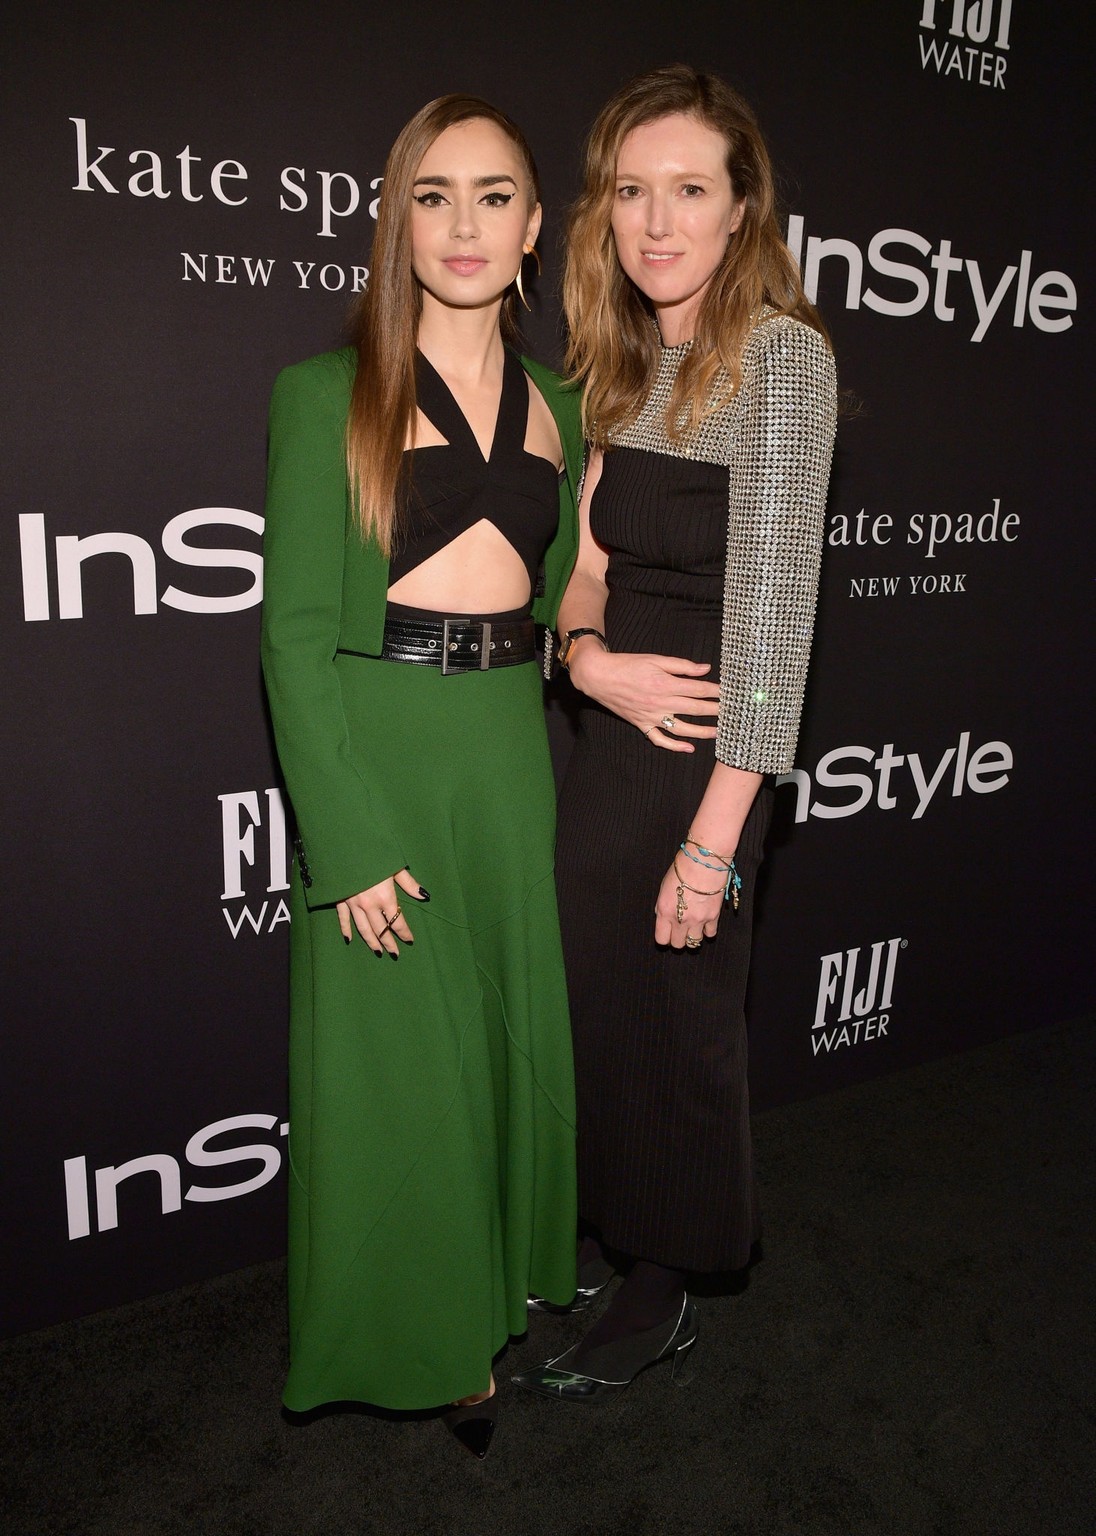 4th_Annual_InStyle_Awards_at_The_Getty_Center_60.jpg